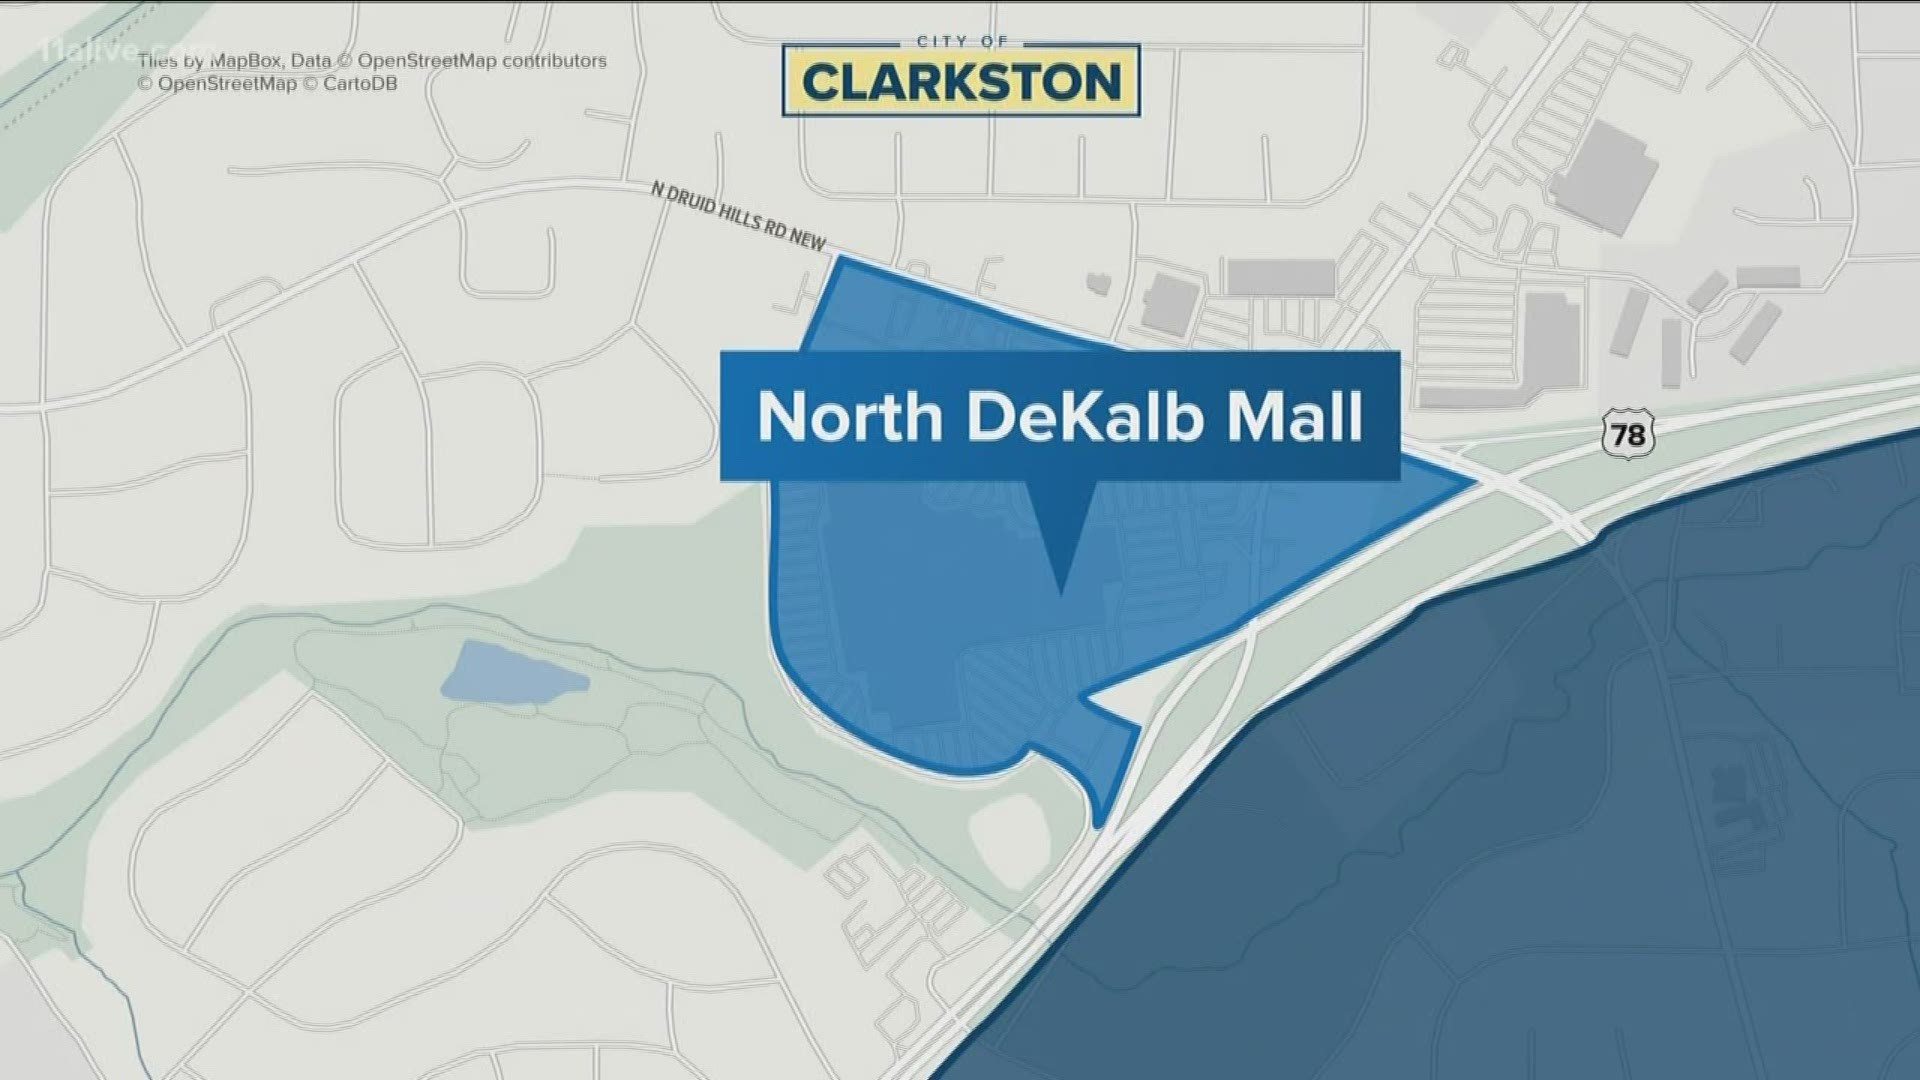 A DeKalb County city aims to annex a nearly-empty shopping mall, at a time when shopping malls have bottomed out as fixtures in American commerce.